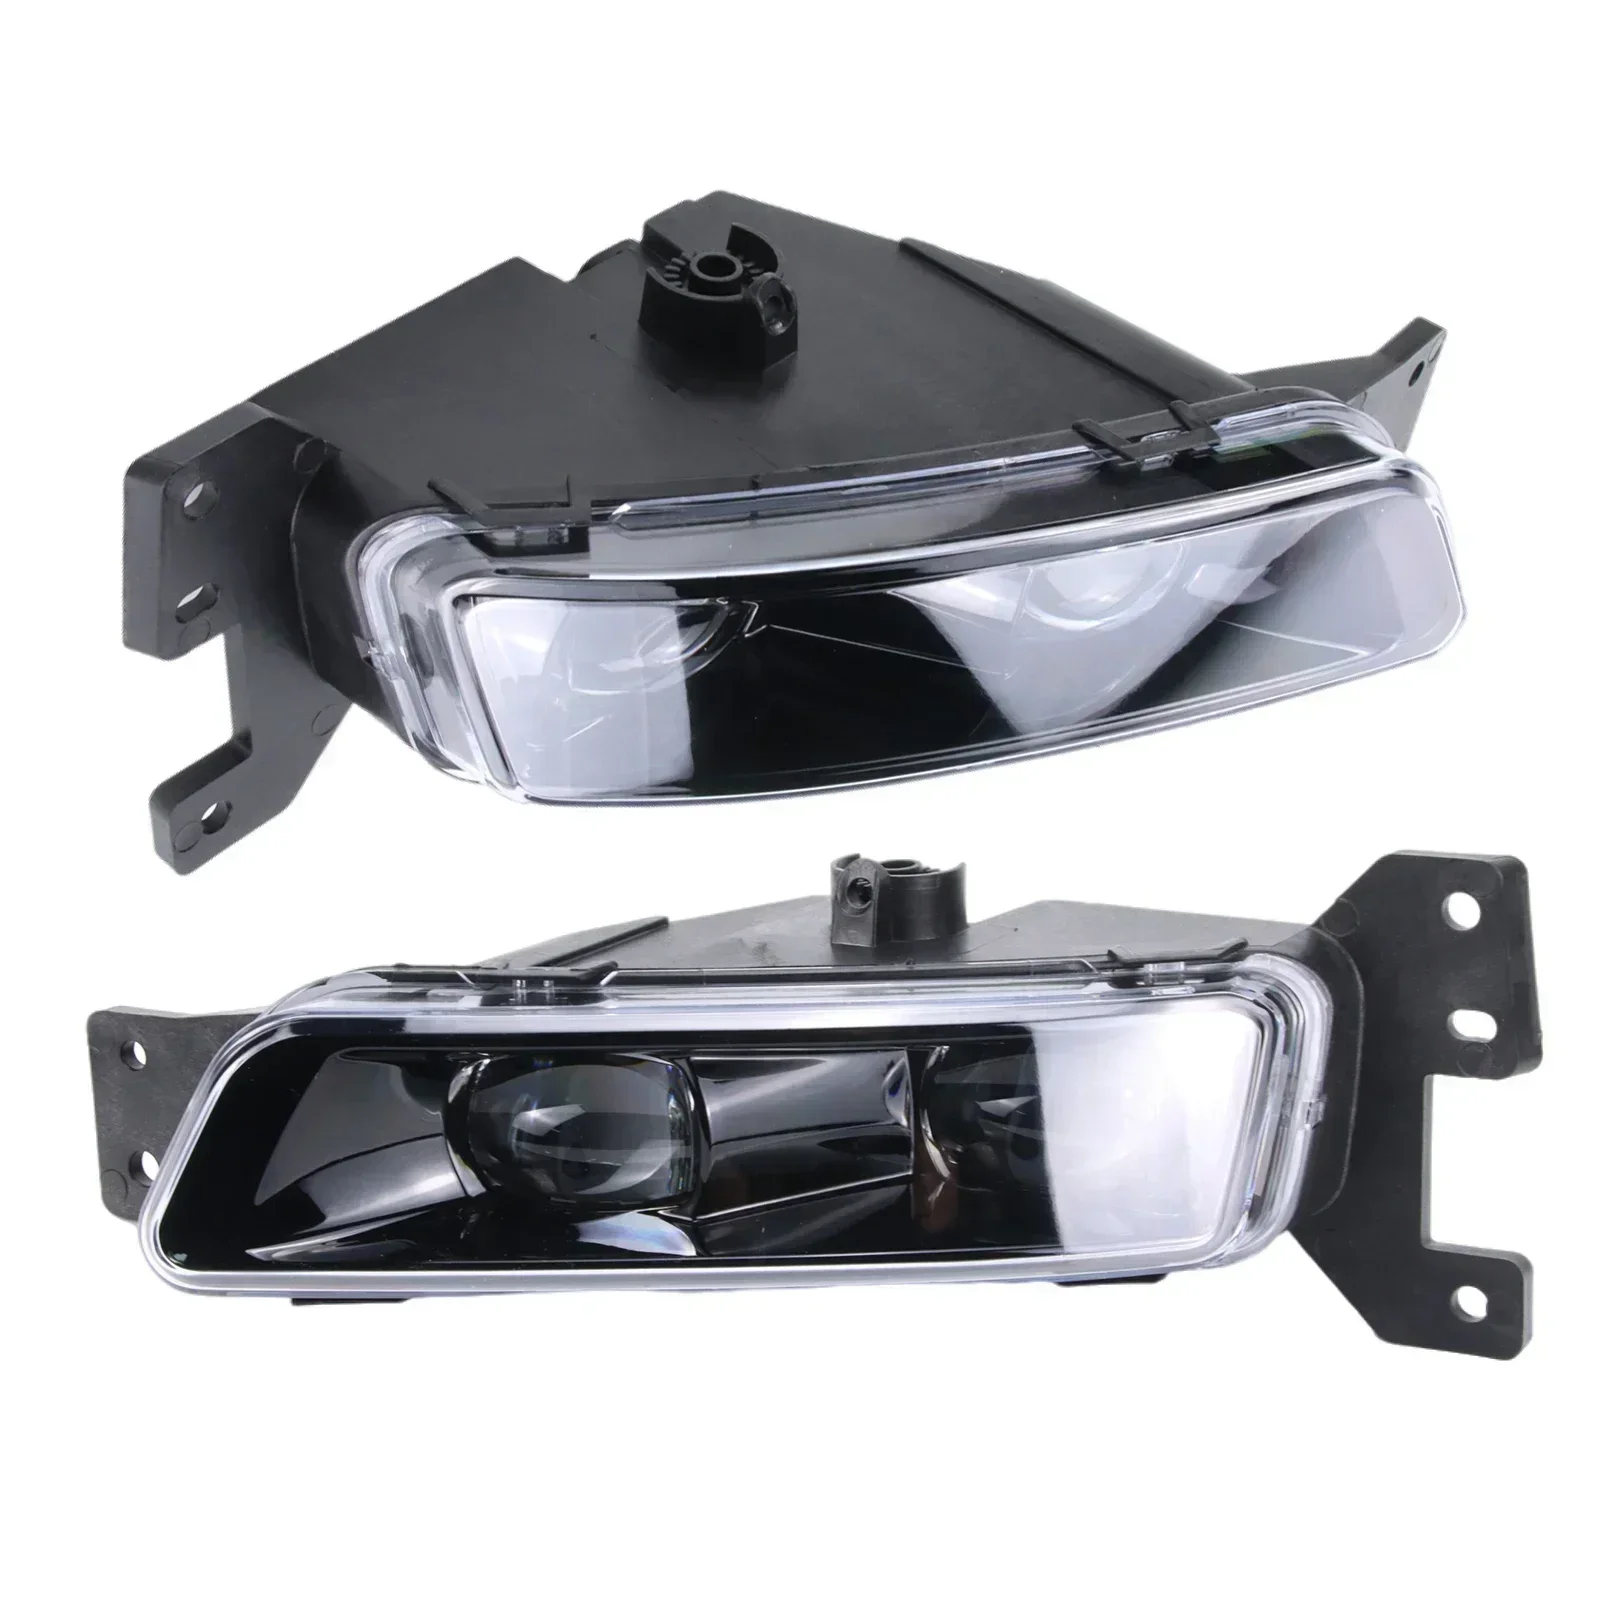 

Front Bumper LED Fog Light Lamp For Dodge Durango 2018-2022 Left And Right White Clear Headlights Car Accessories